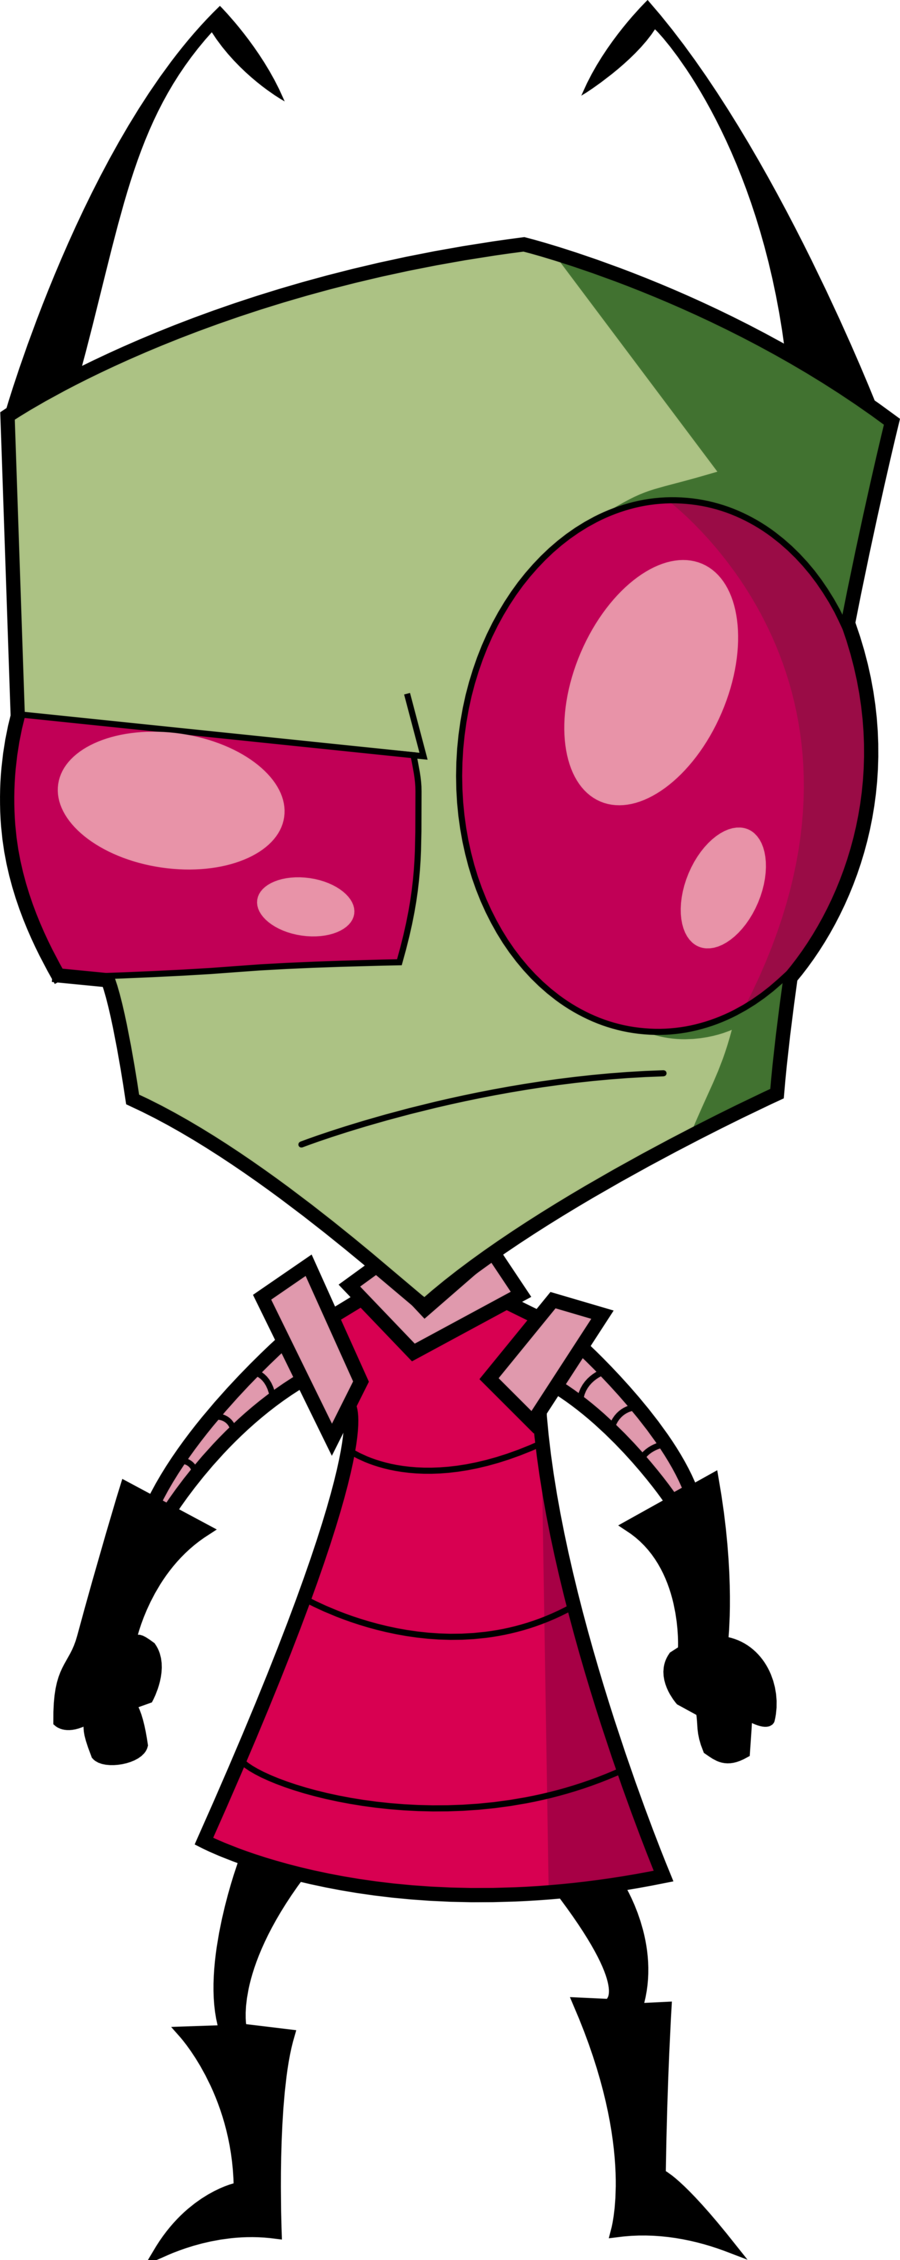 Invader Zim Wallpapers Cartoon Hq Invader Zim Pictures 4k Images, Photos, Reviews